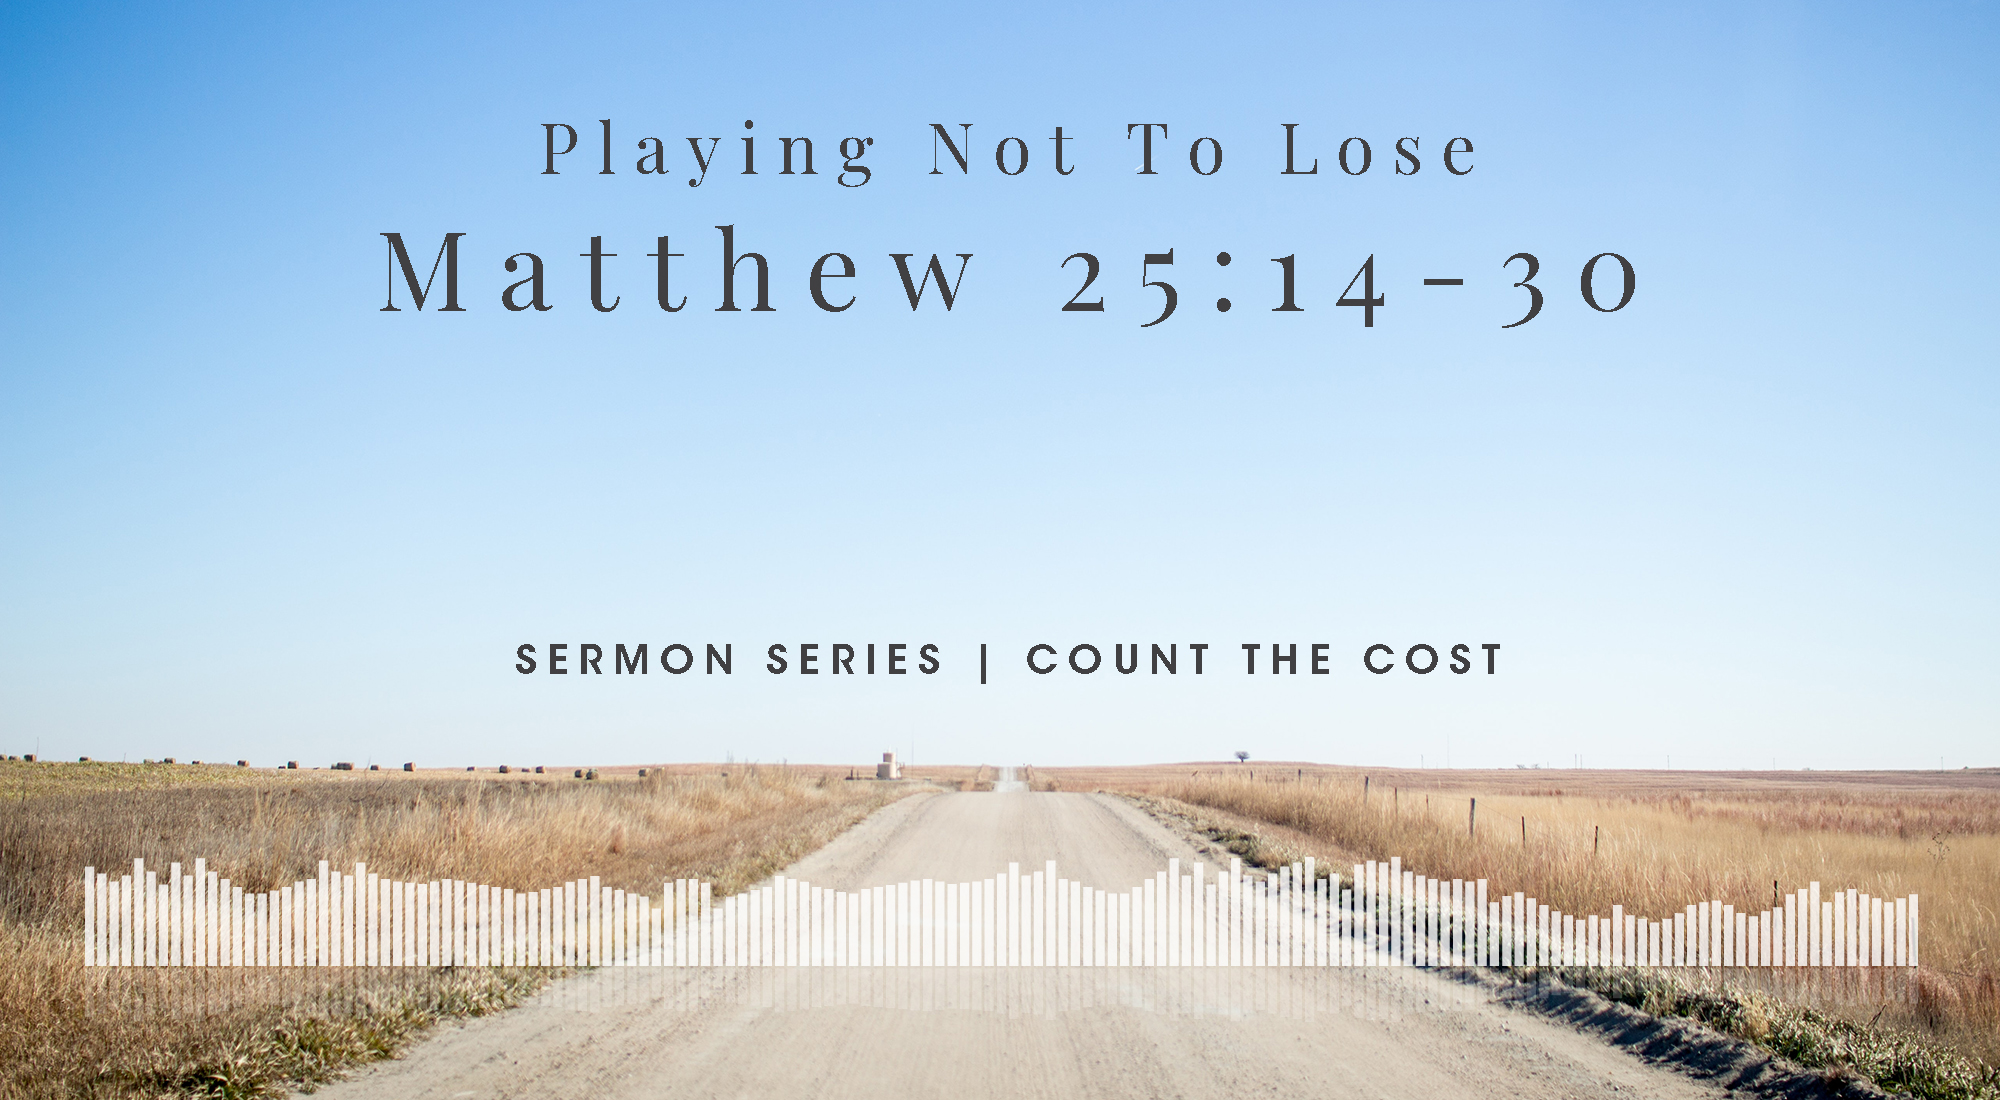 Playing Not To Lose, Matthew 25 From Our Count The Cost Sermon Series